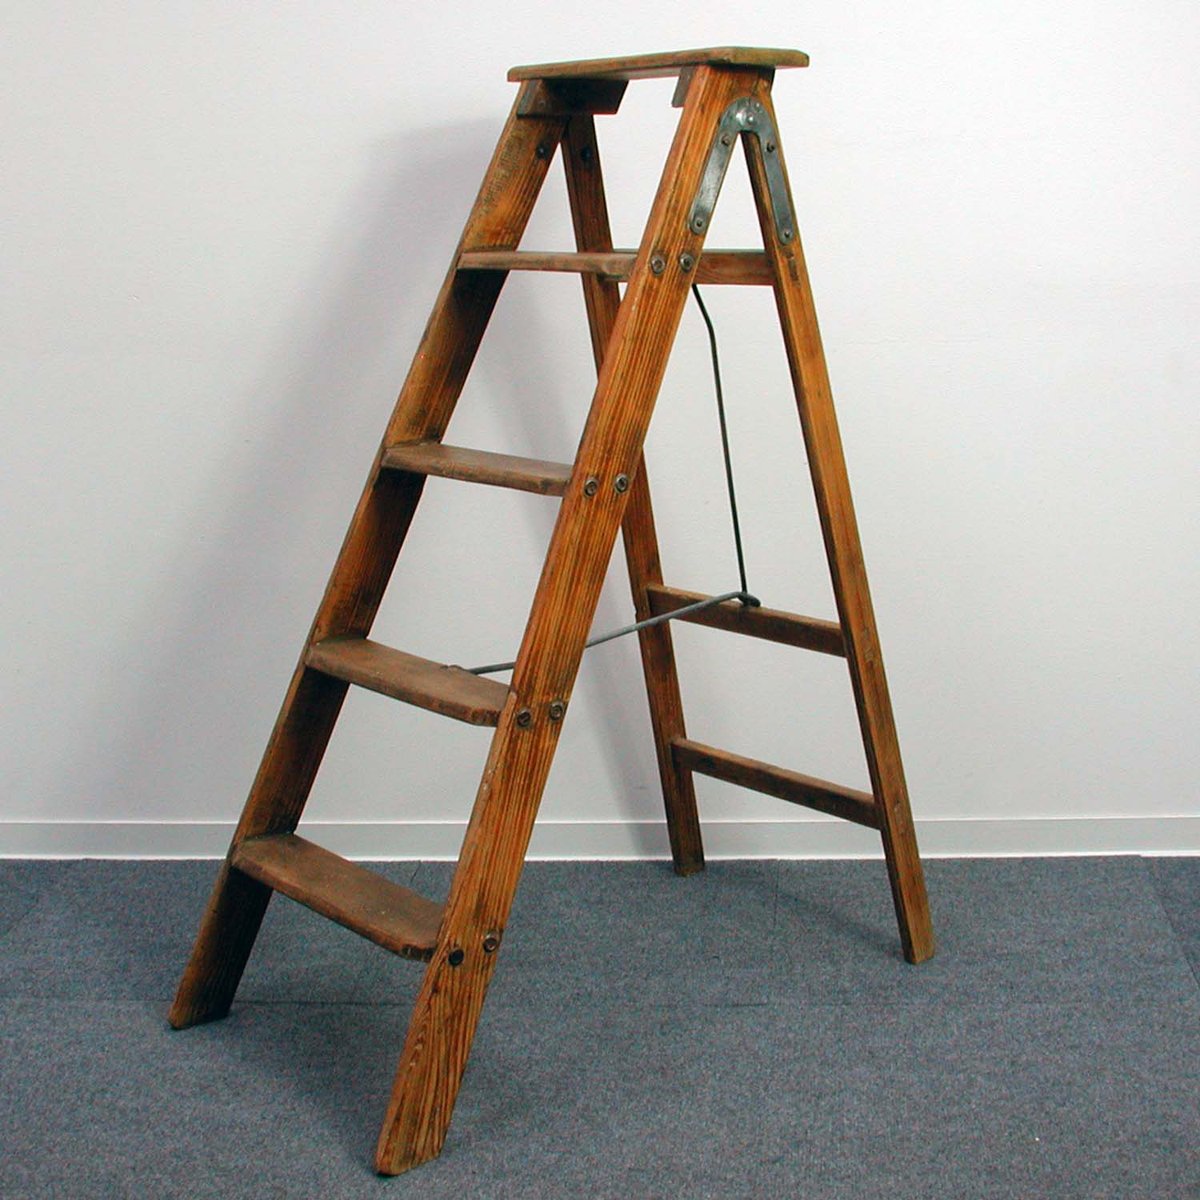 Vintage Industrial French Wooden Ladder for sale at Pamono.